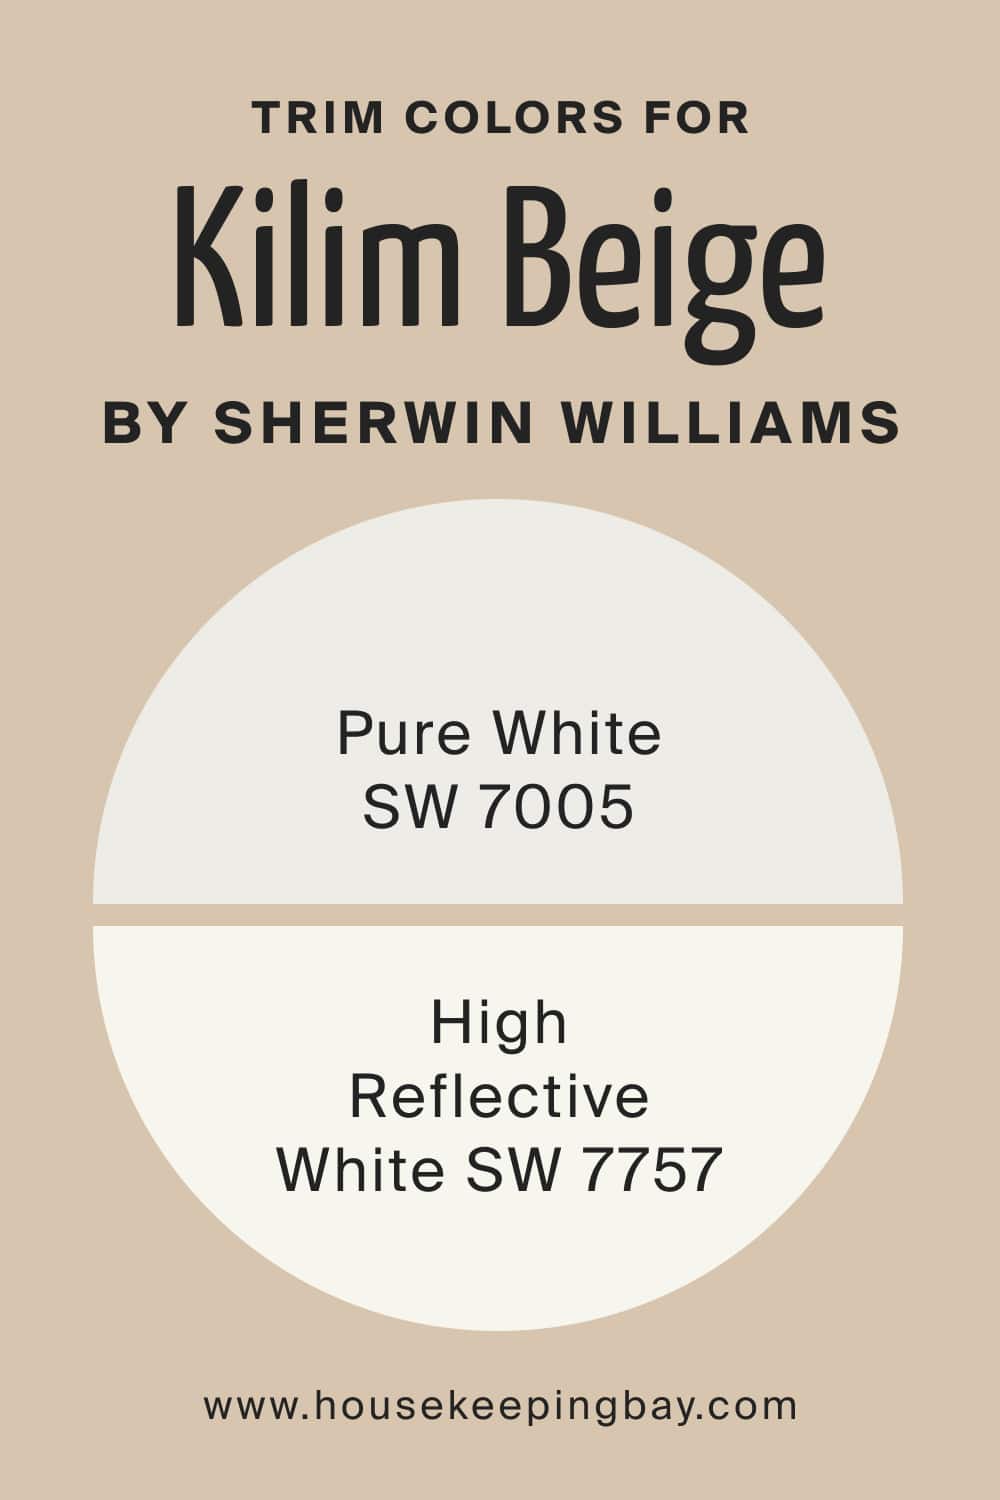 Trim Colors for Kilim Beige SW 6106 by Sherwin Williams